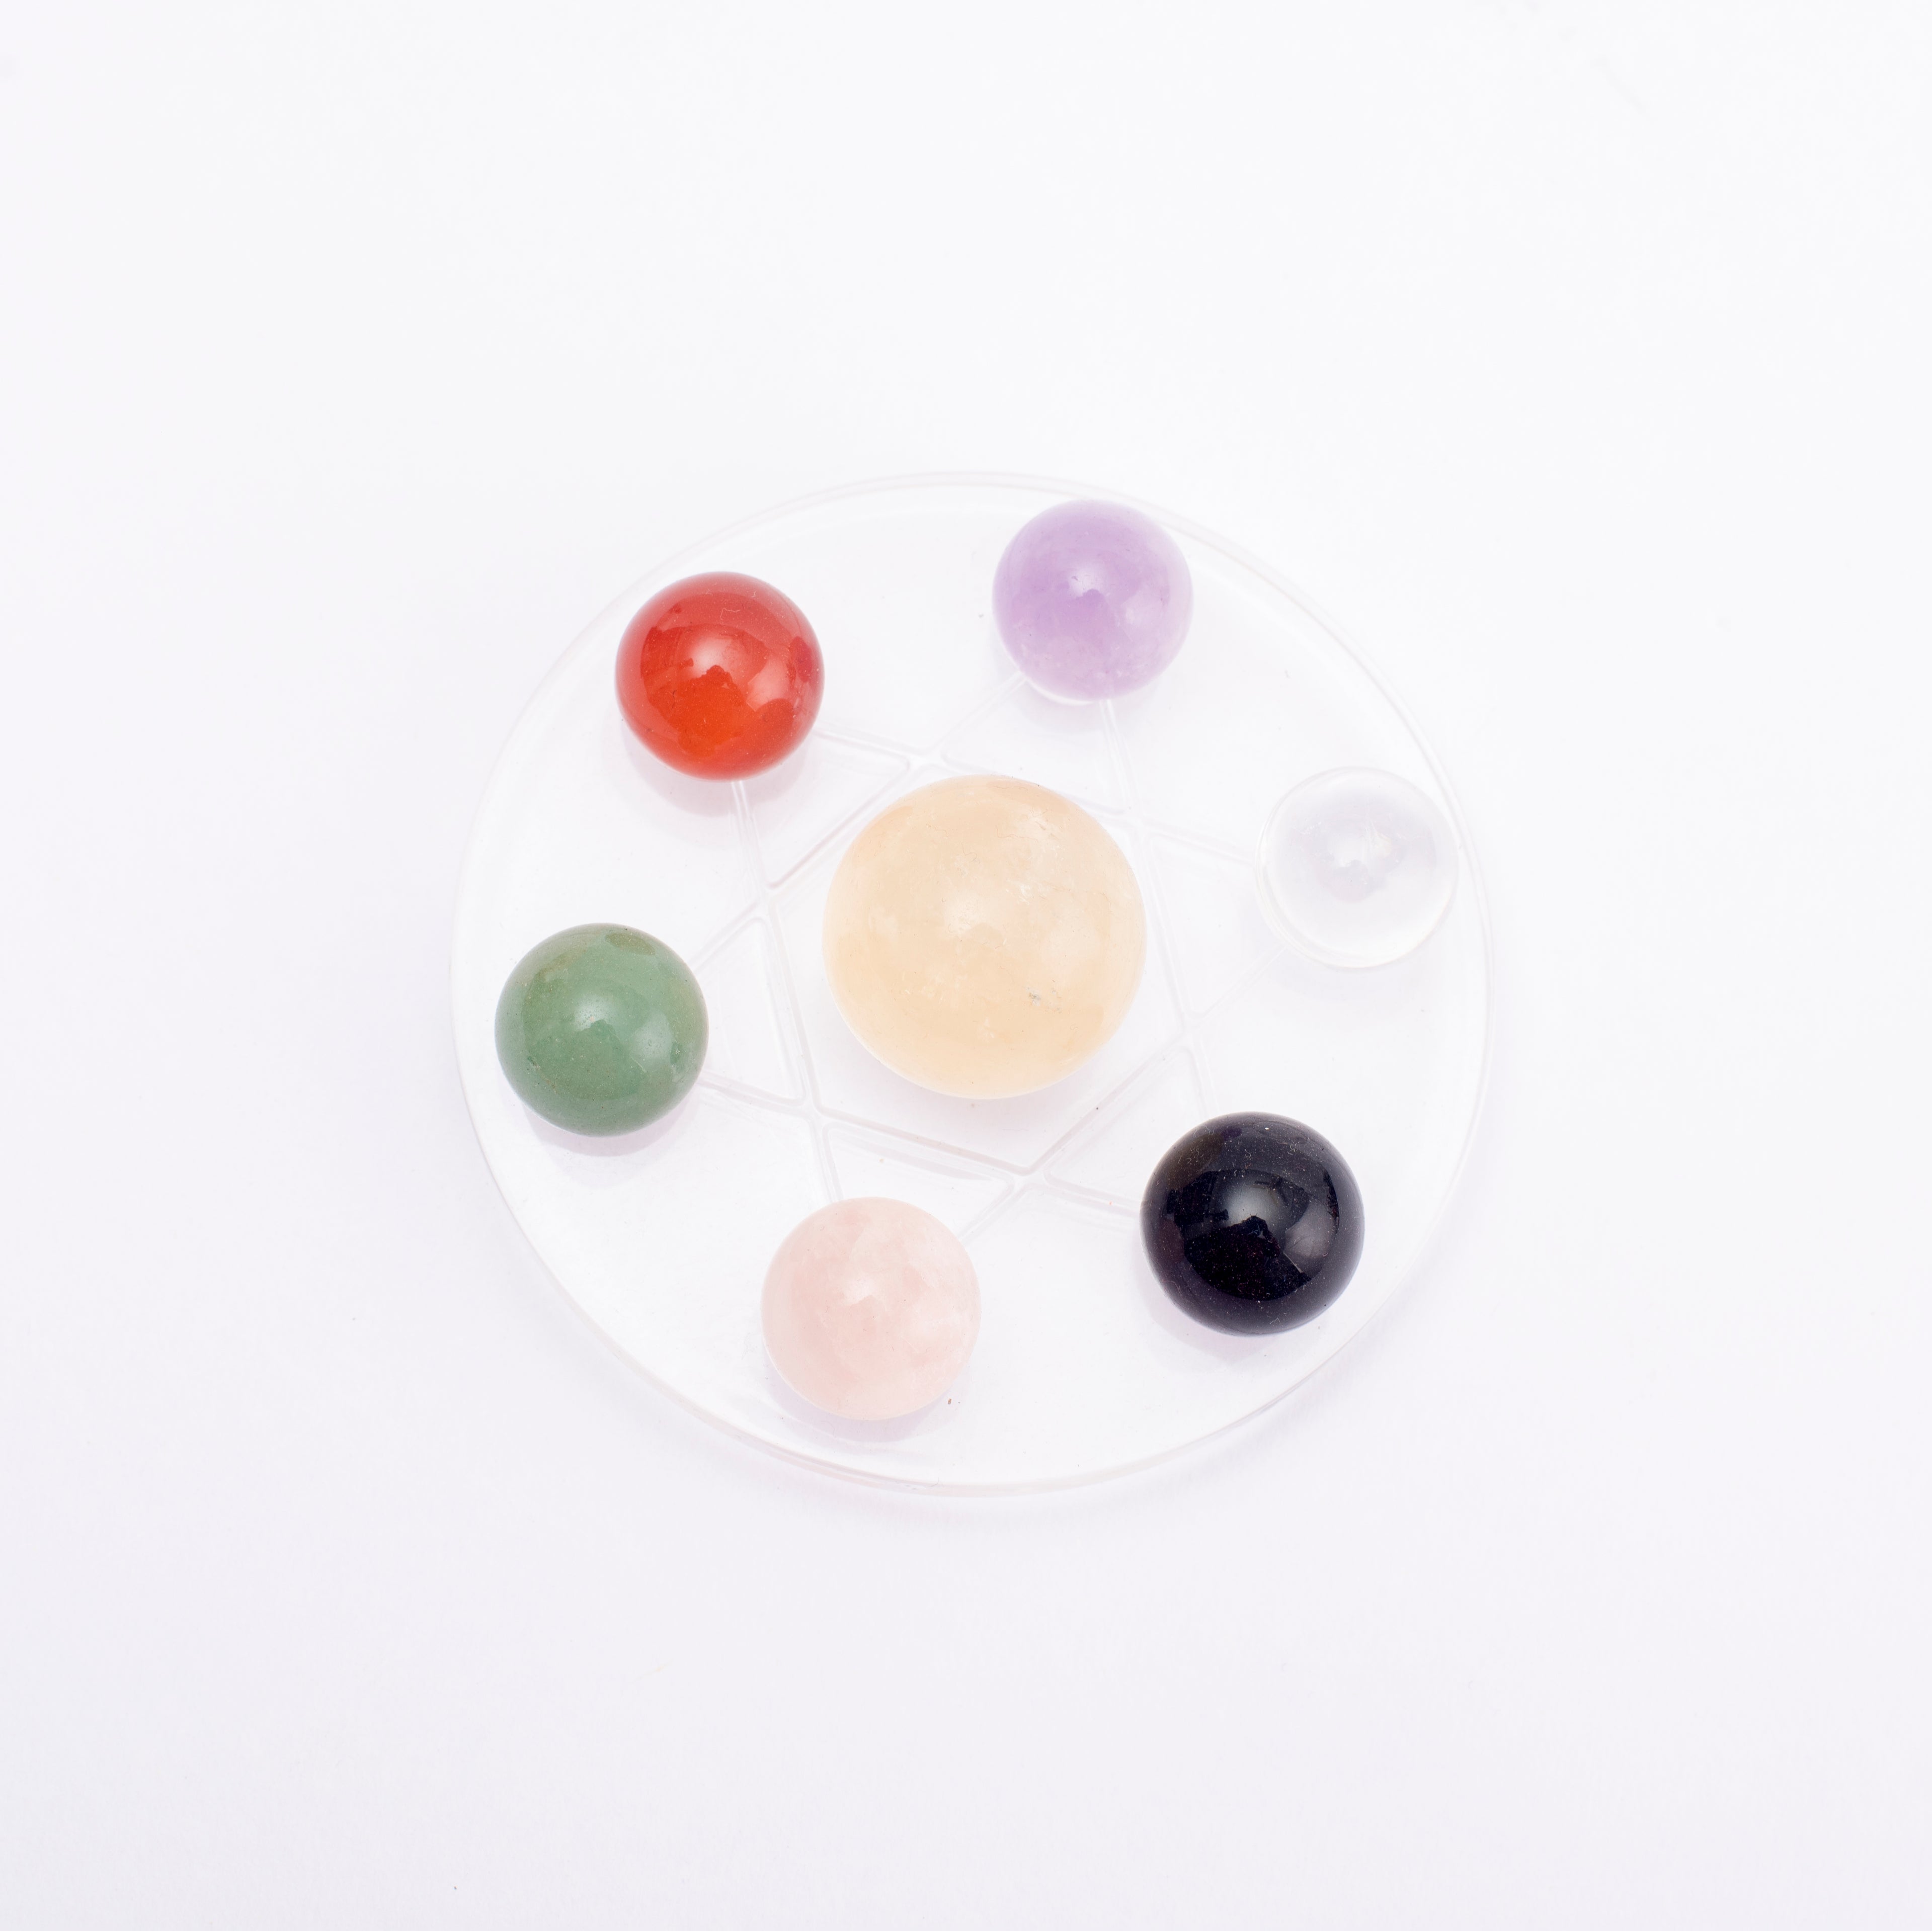 7 Chakra Balls with Grid Plate